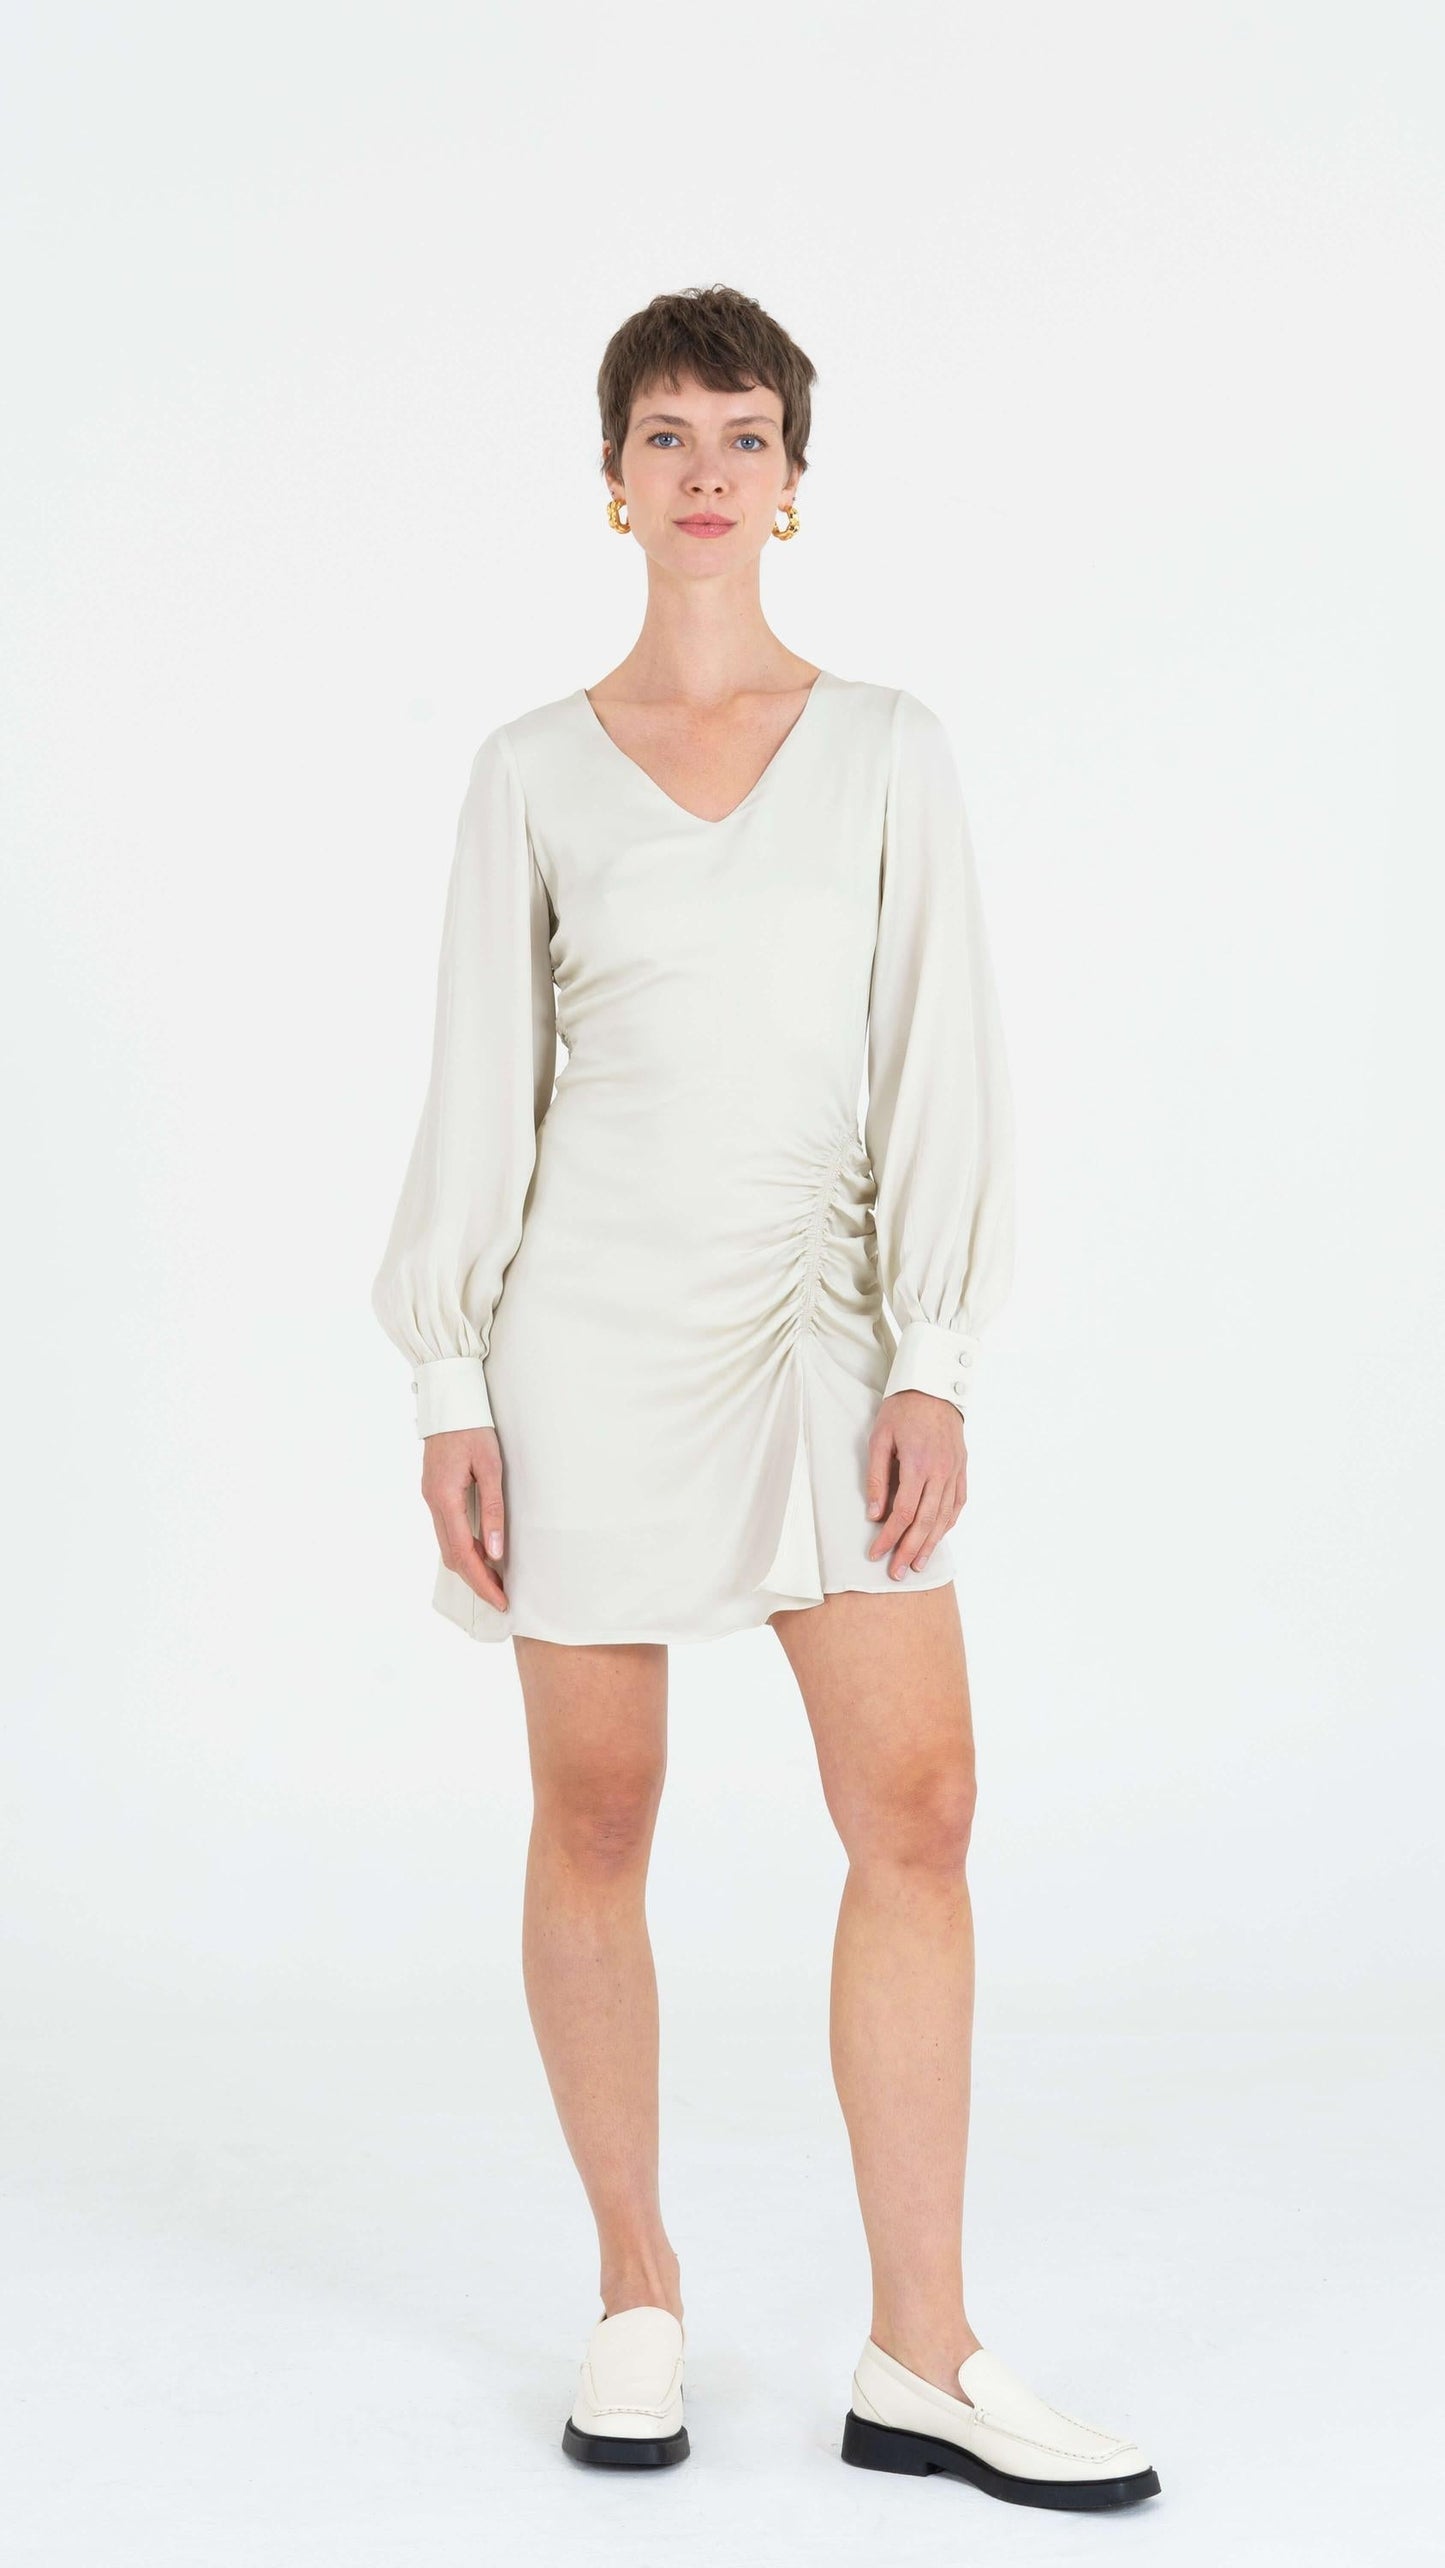 Ruched dress